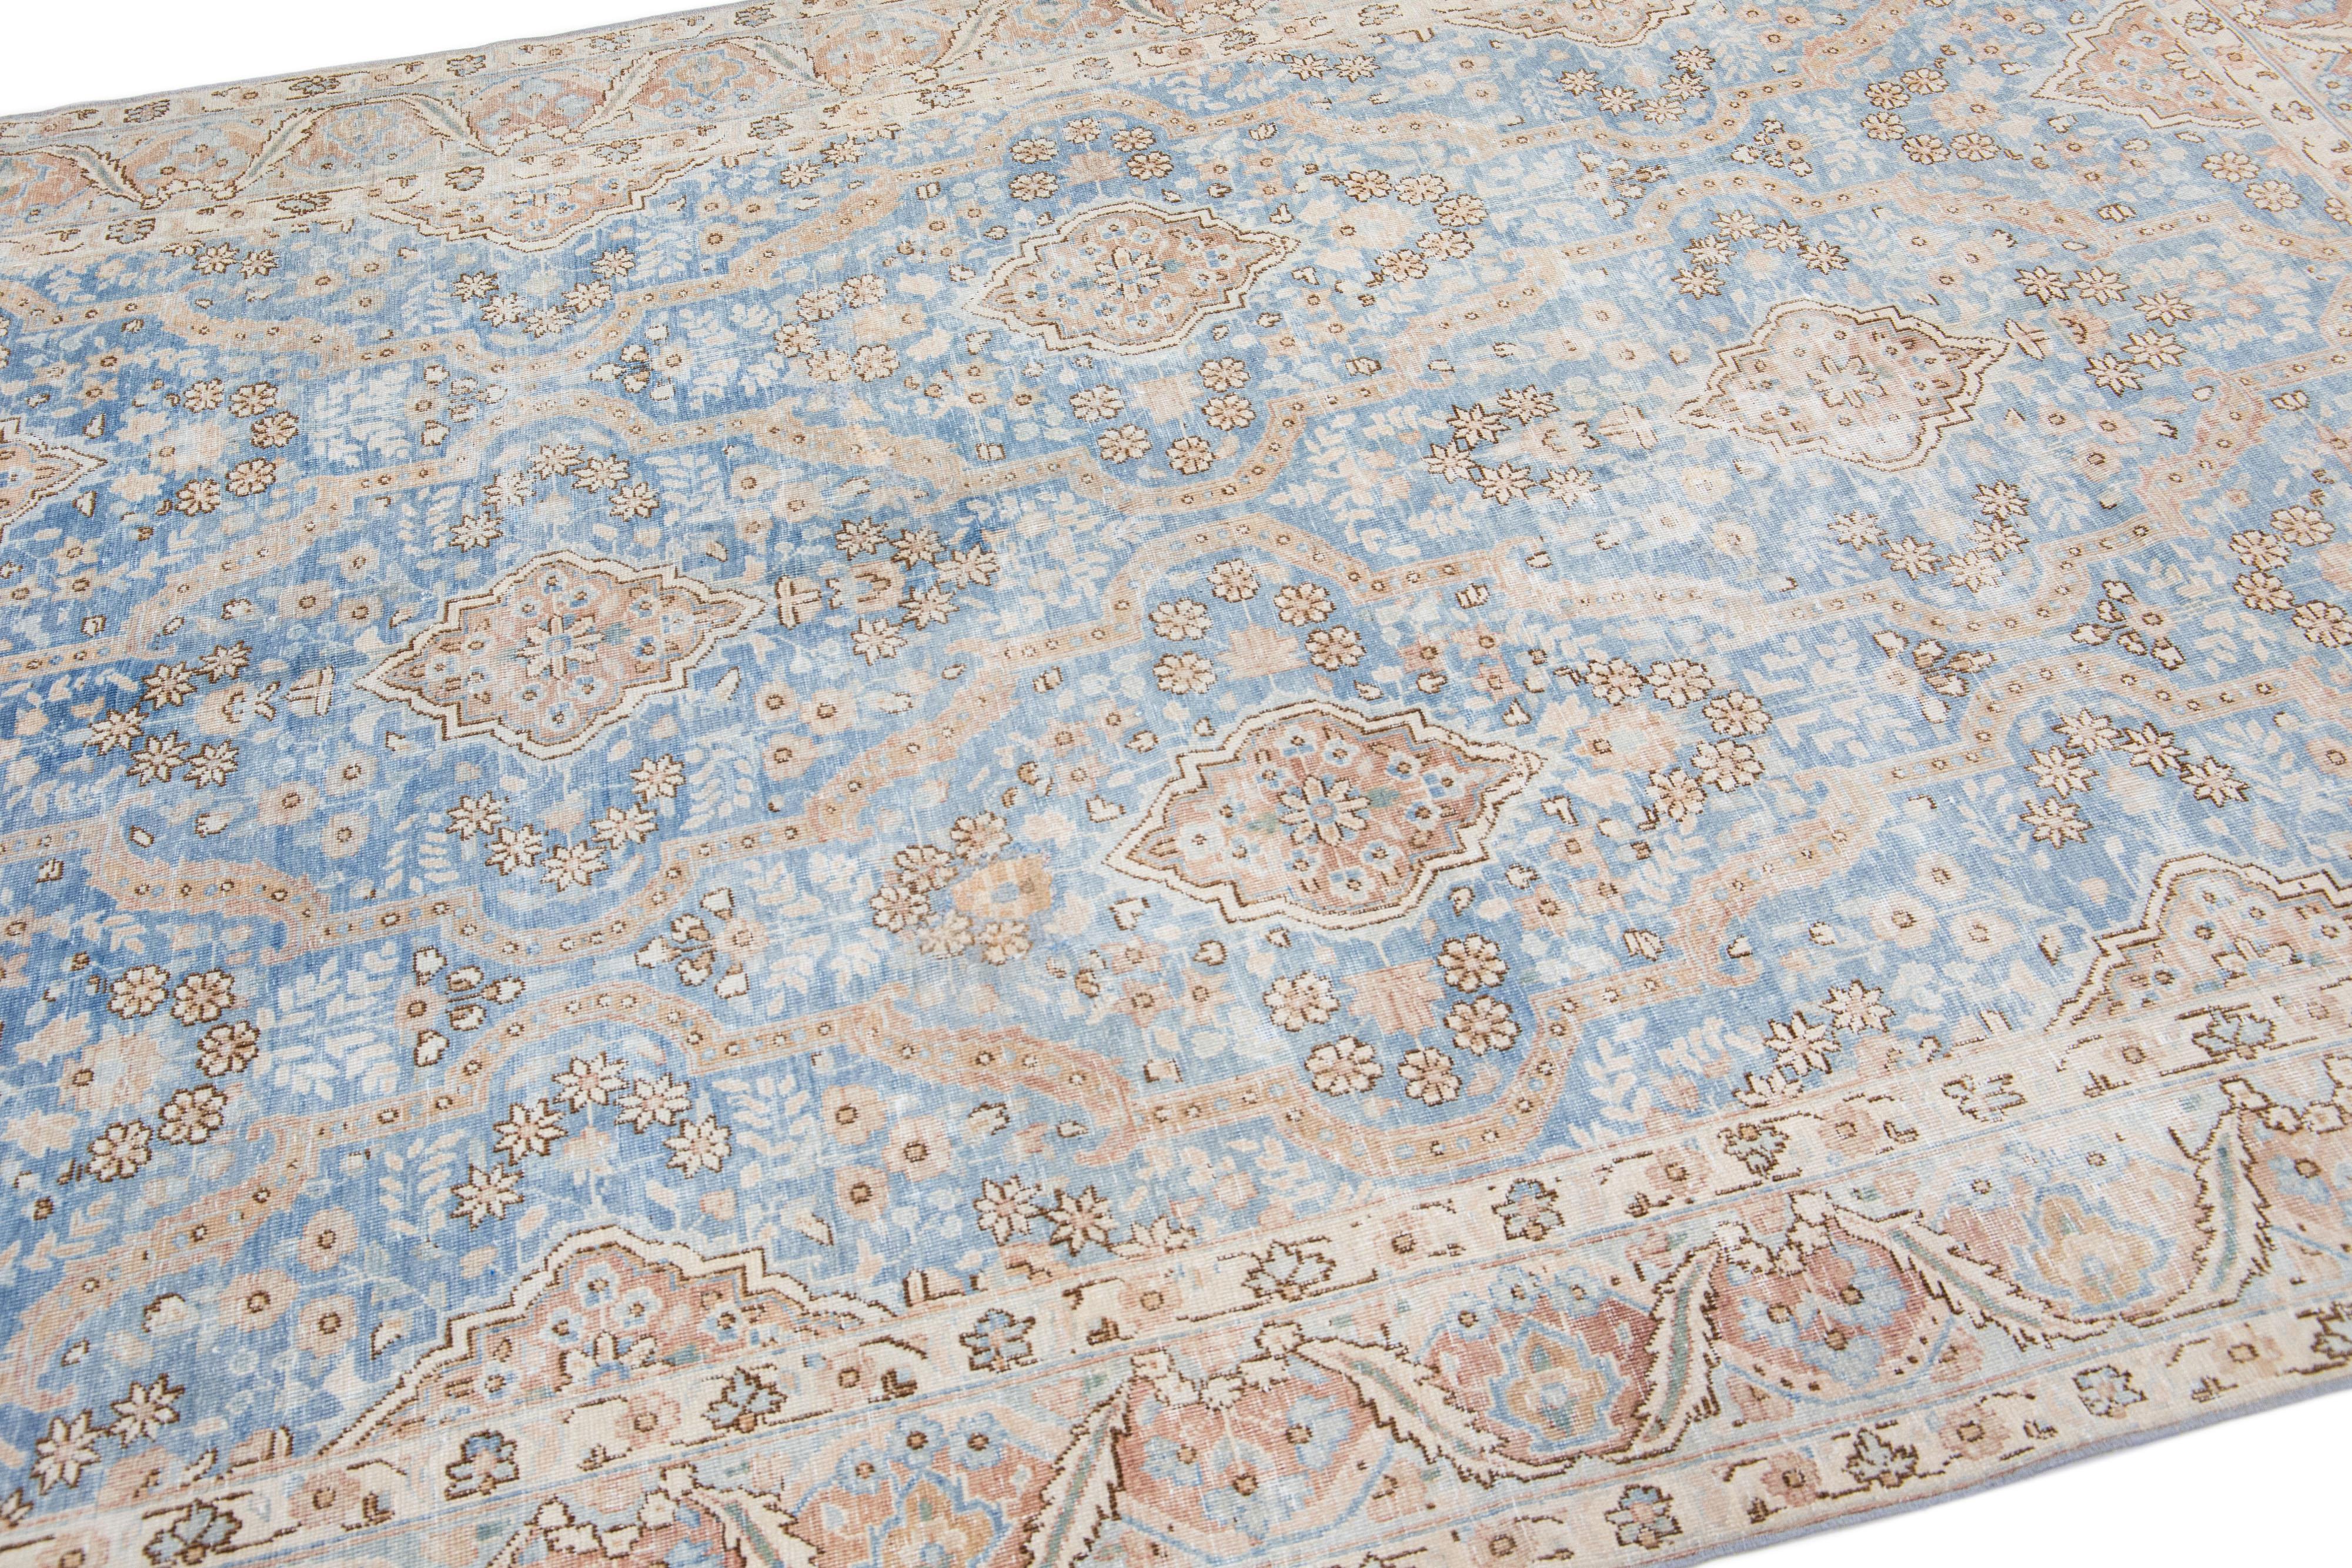 Antique Handmade Blue Persian Tabriz Wool Rug with Allover Motif In Good Condition For Sale In Norwalk, CT